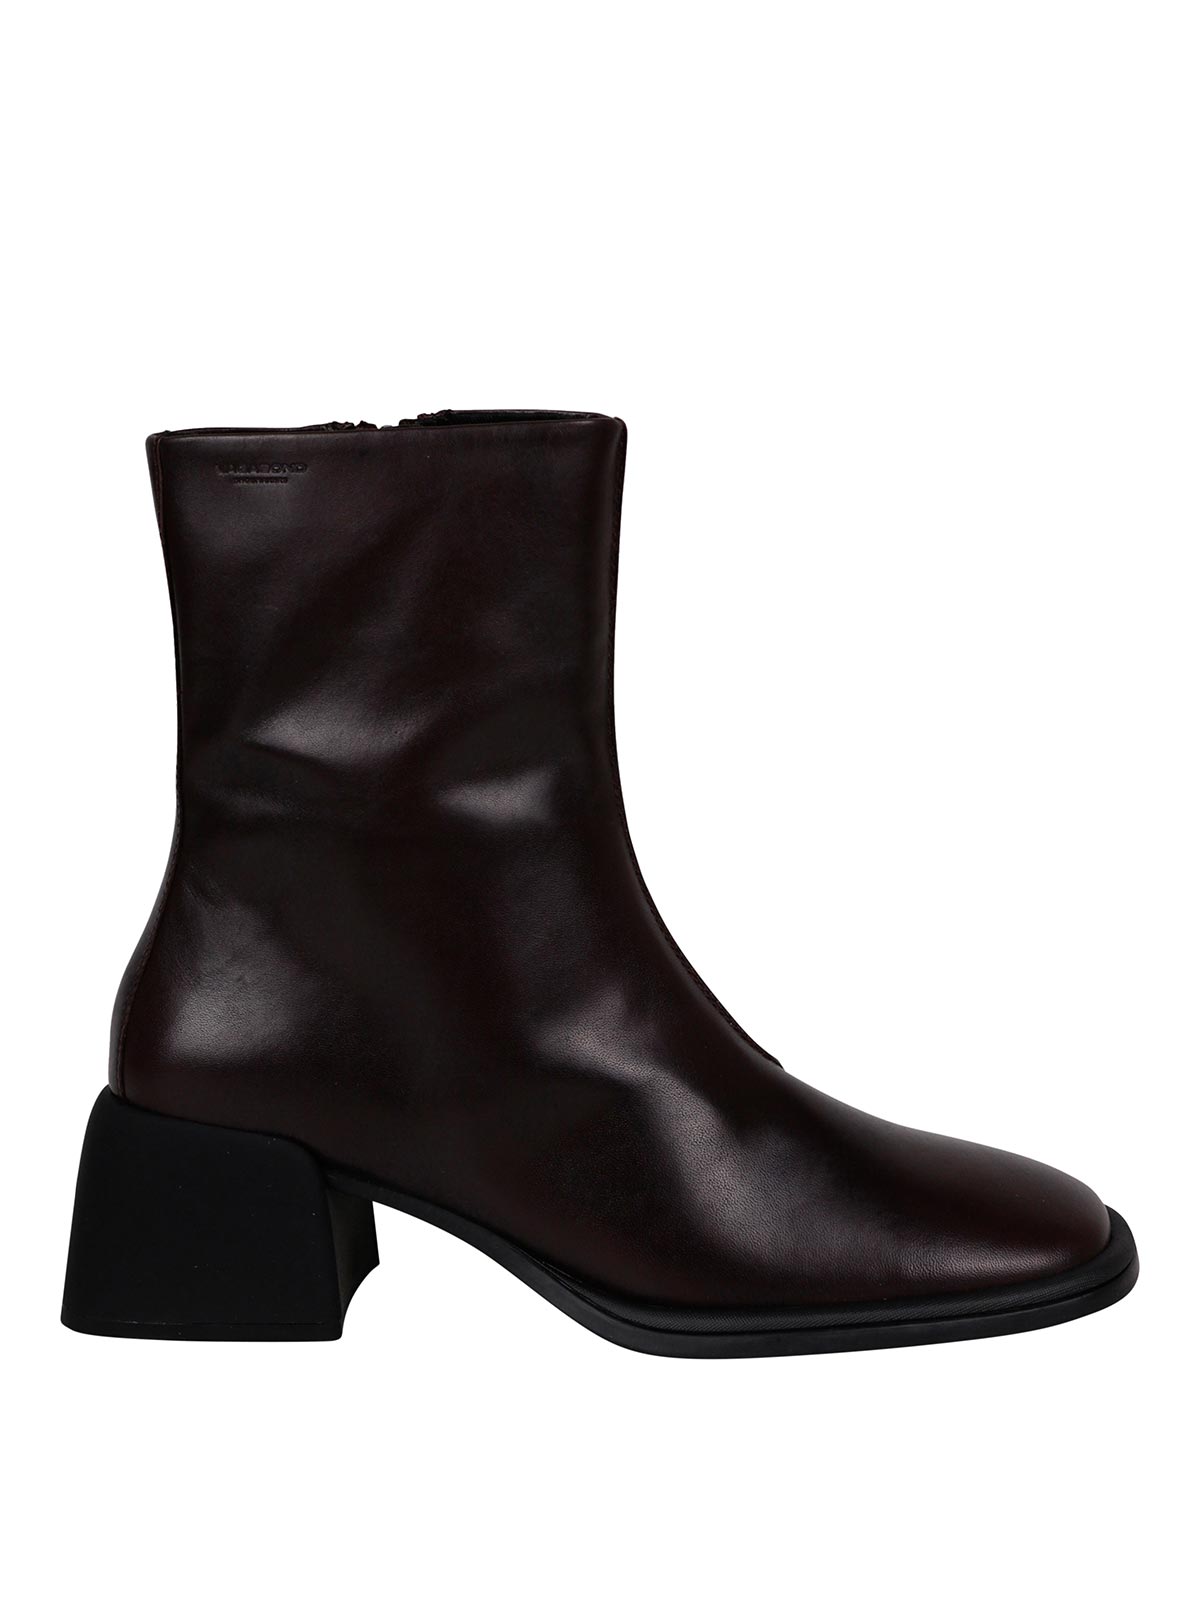 Vagabond Anxiety Ankle Boots In Brown